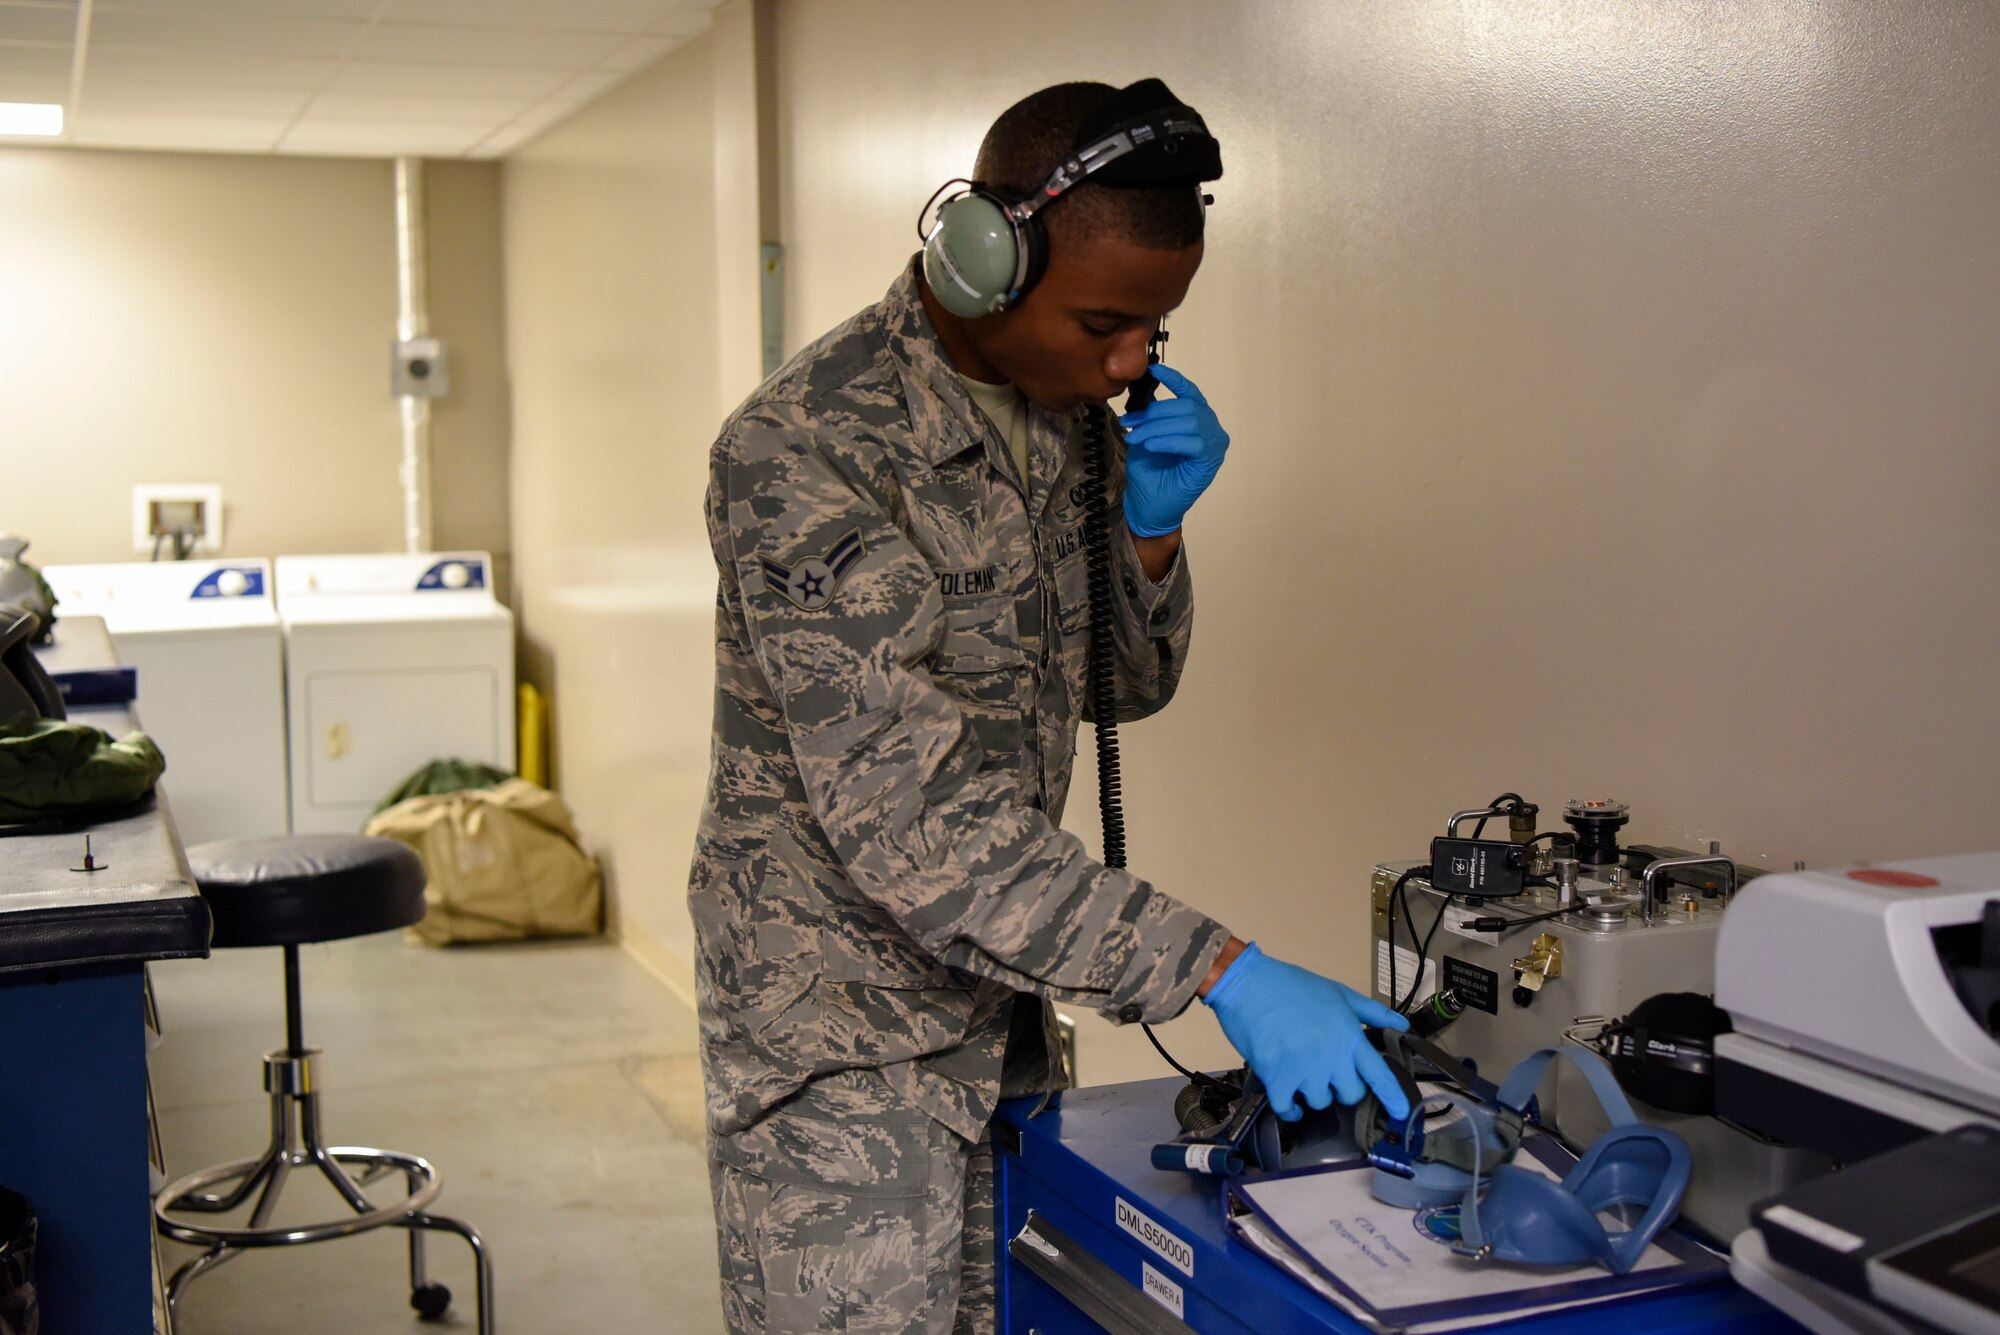 Airman 1st Class David Coleman, 436th Operations Support Squadron aircrew flight equipment apprentice, tests the microphone of a headset May 23, 2018, at Dover Air Force Base, Del. The headsets are used for easy communication between aircrew members during a flight. (U.S Air Force photo by Airman 1st Class Zoe M. Wockenfuss)